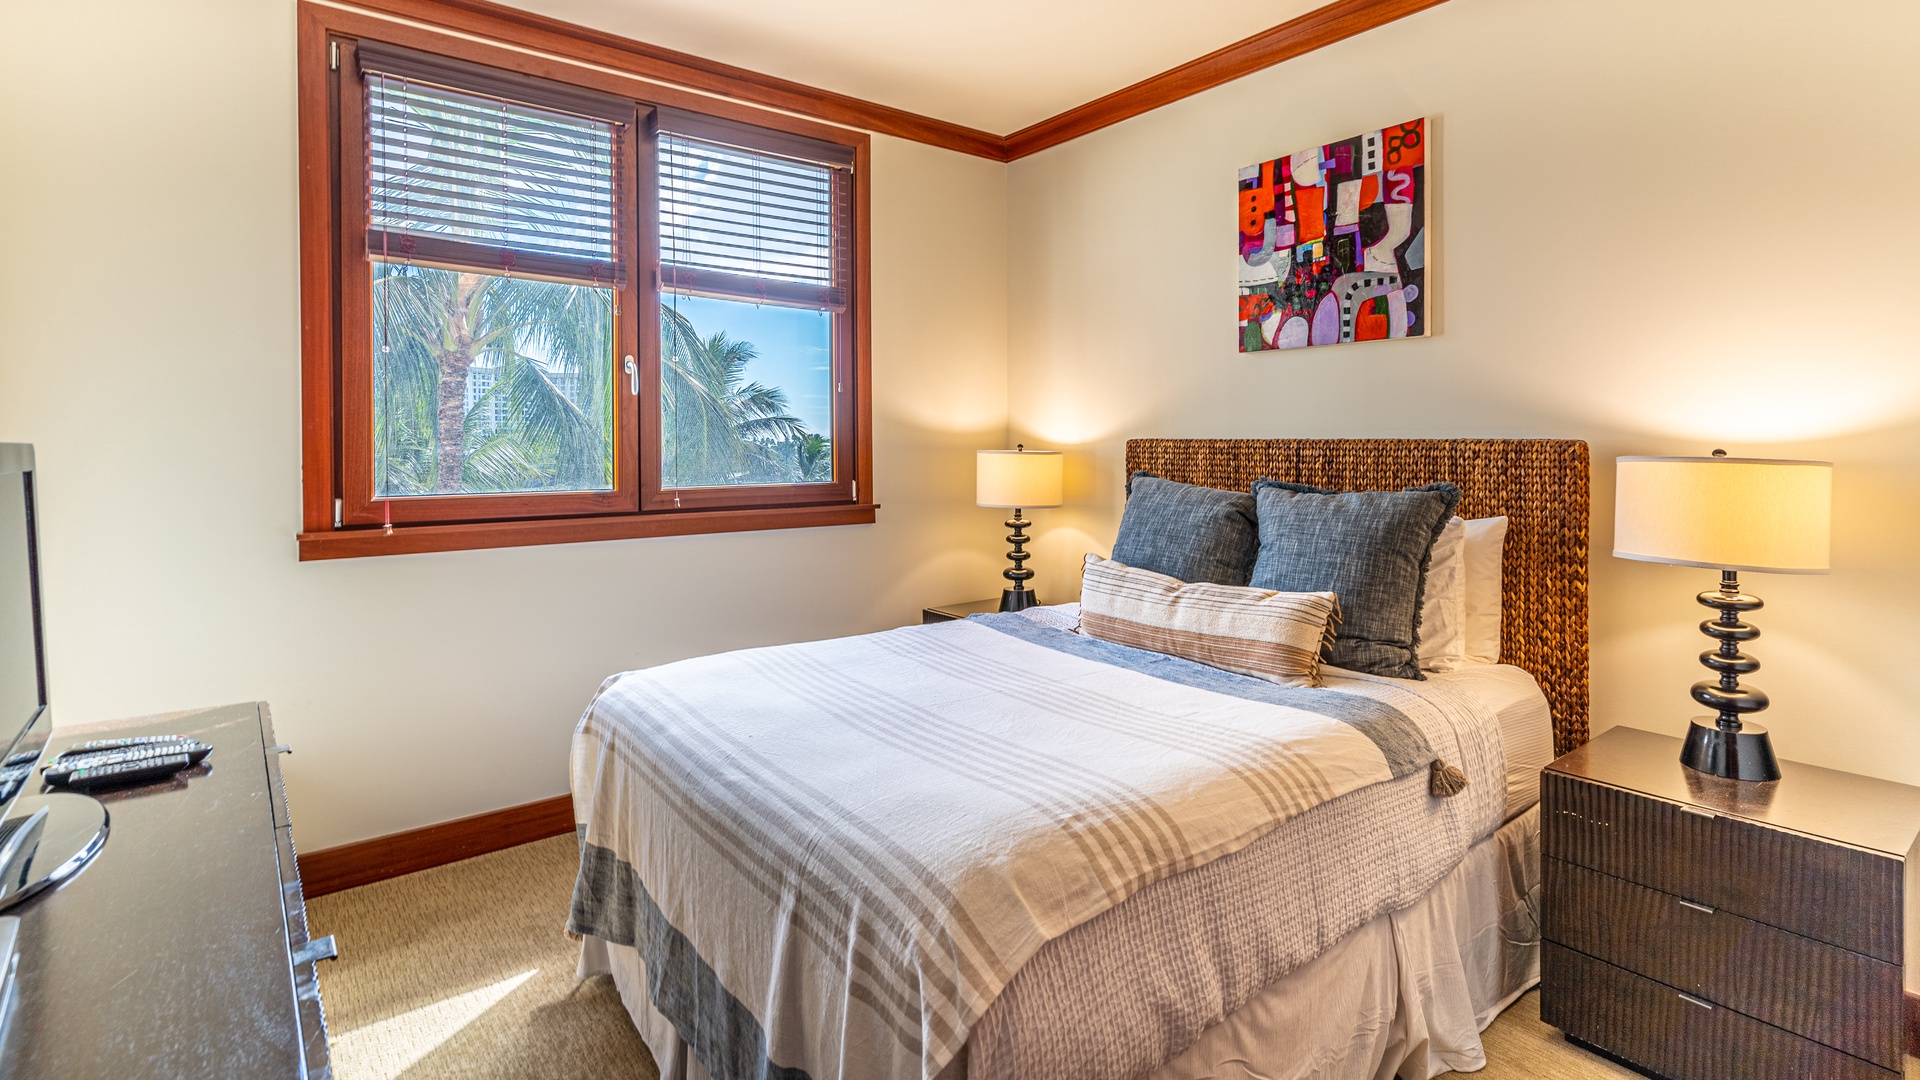 Kapolei Vacation Rentals, Ko Olina Beach Villas B403 - The second guest bedroom with comfort and views.